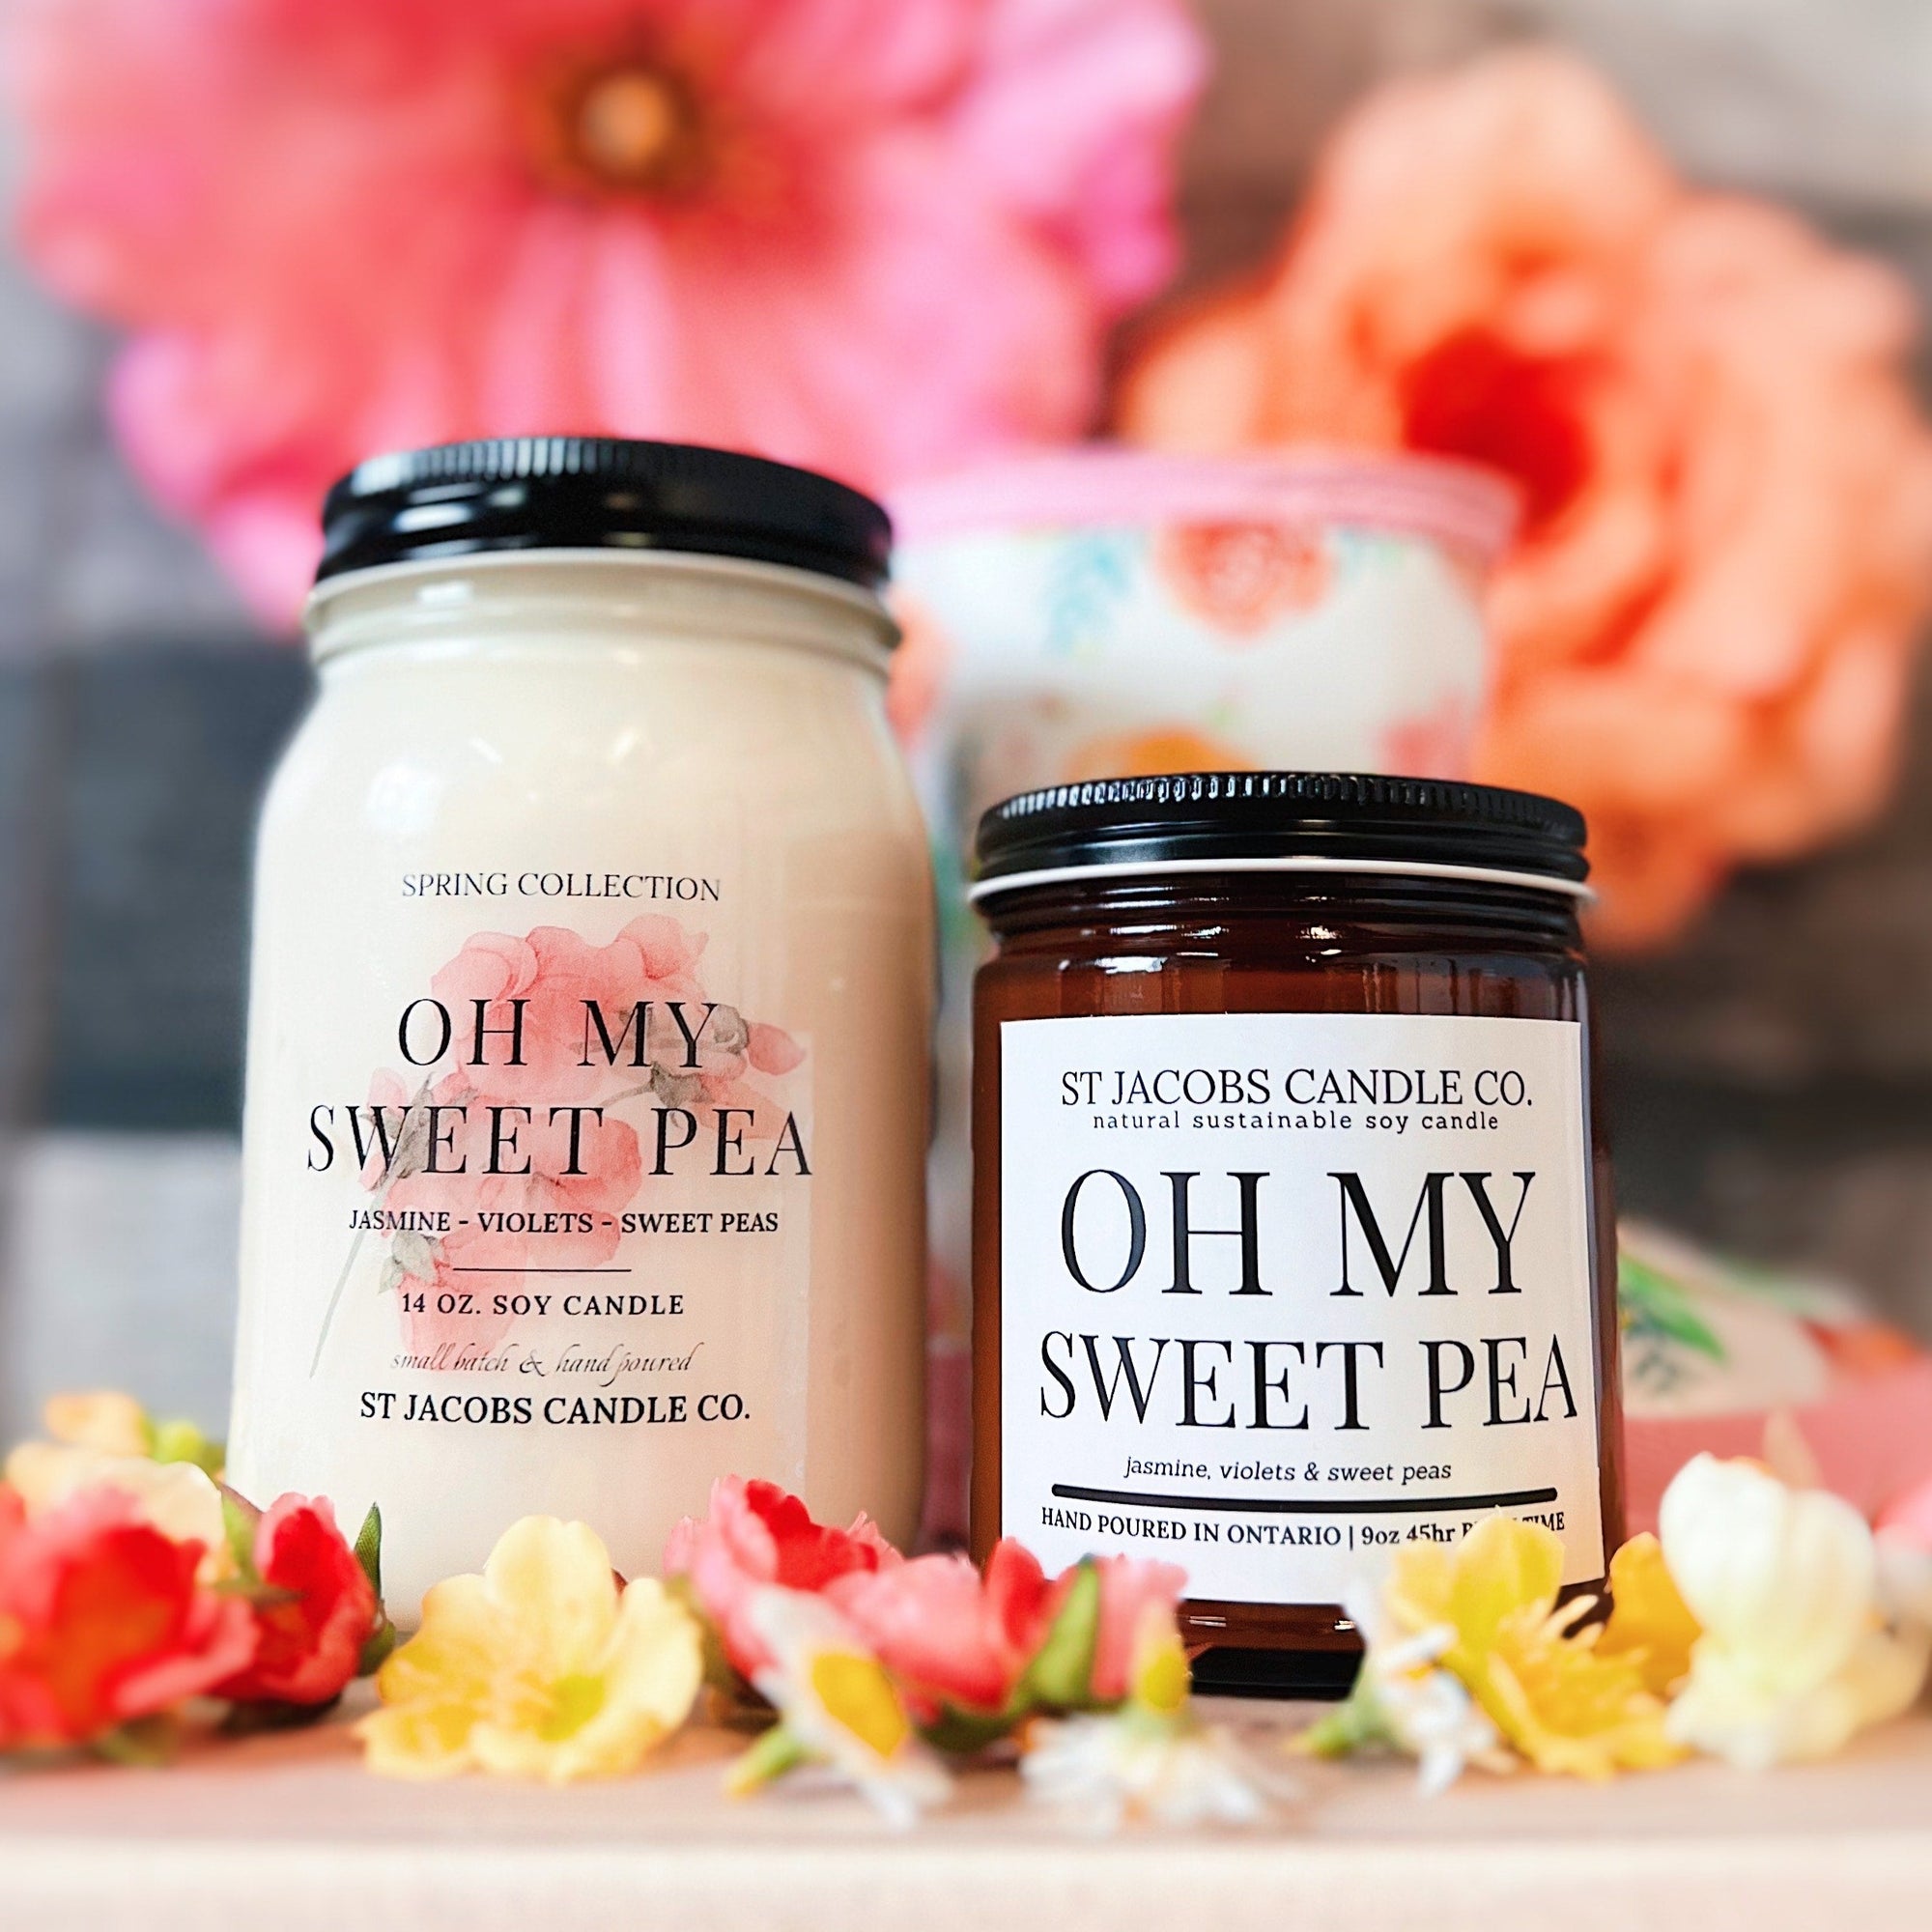 Oh My Sweet Pea Soy Candle- Spring Collection